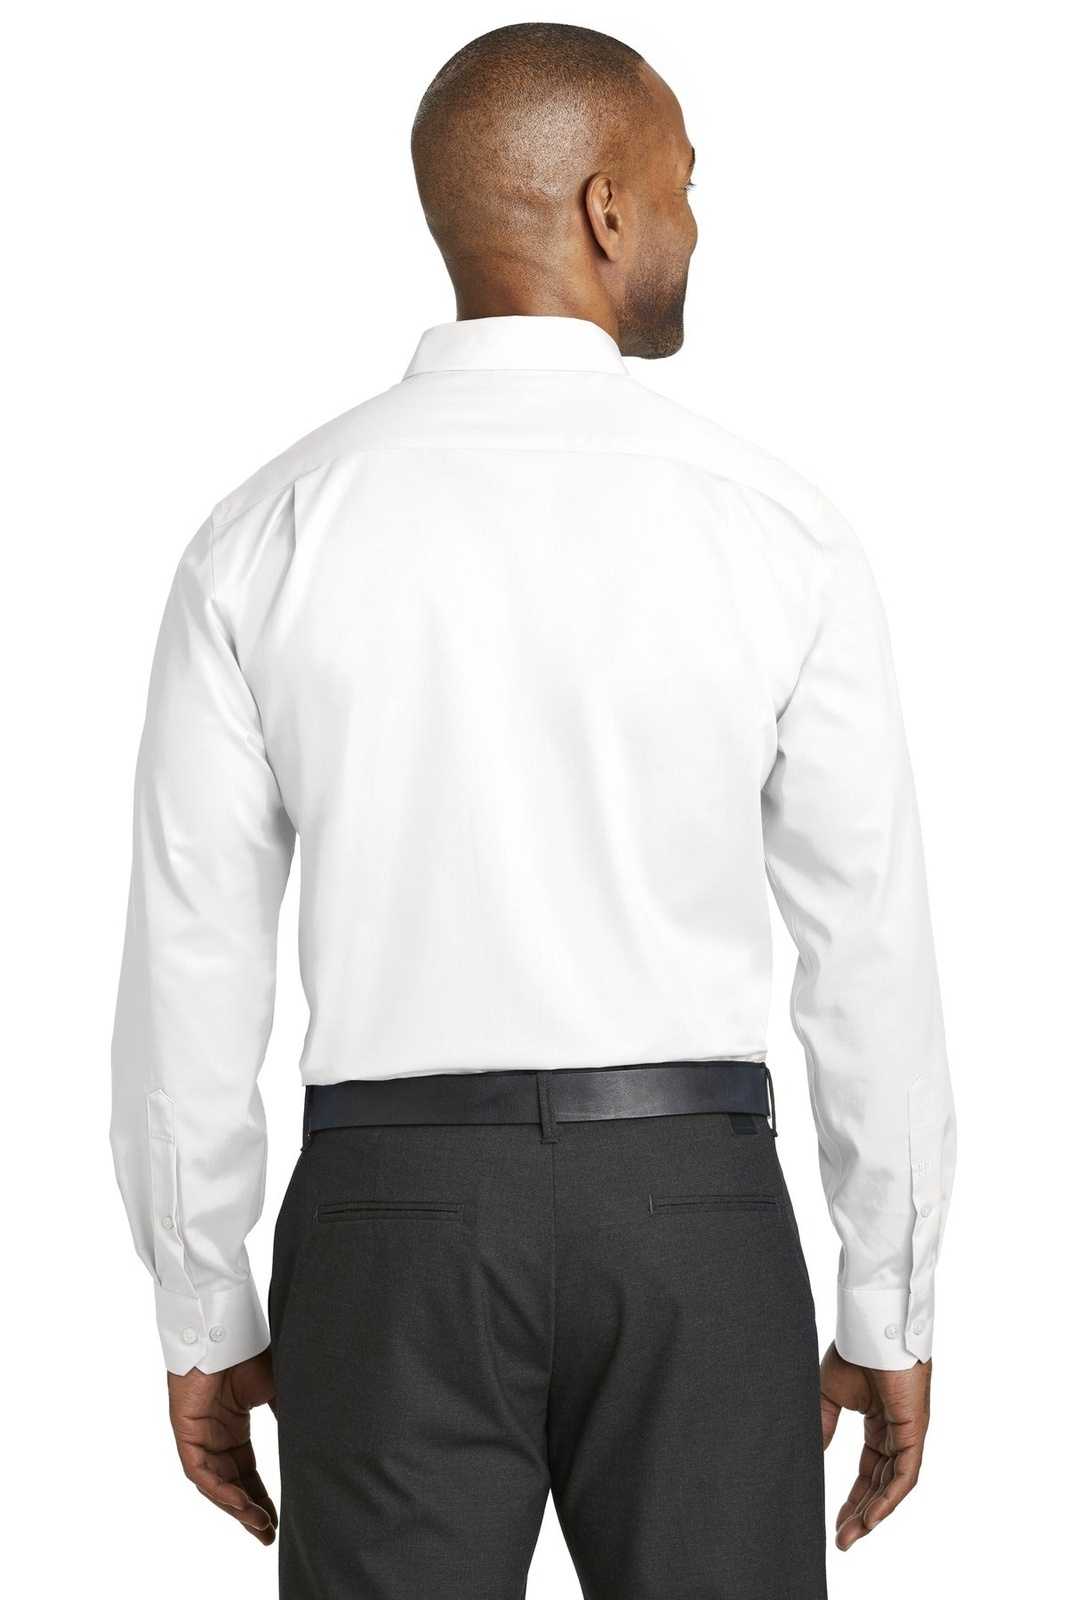 Red House RH80 Slim Fit Non-Iron Twill Shirt - White - HIT a Double - 1